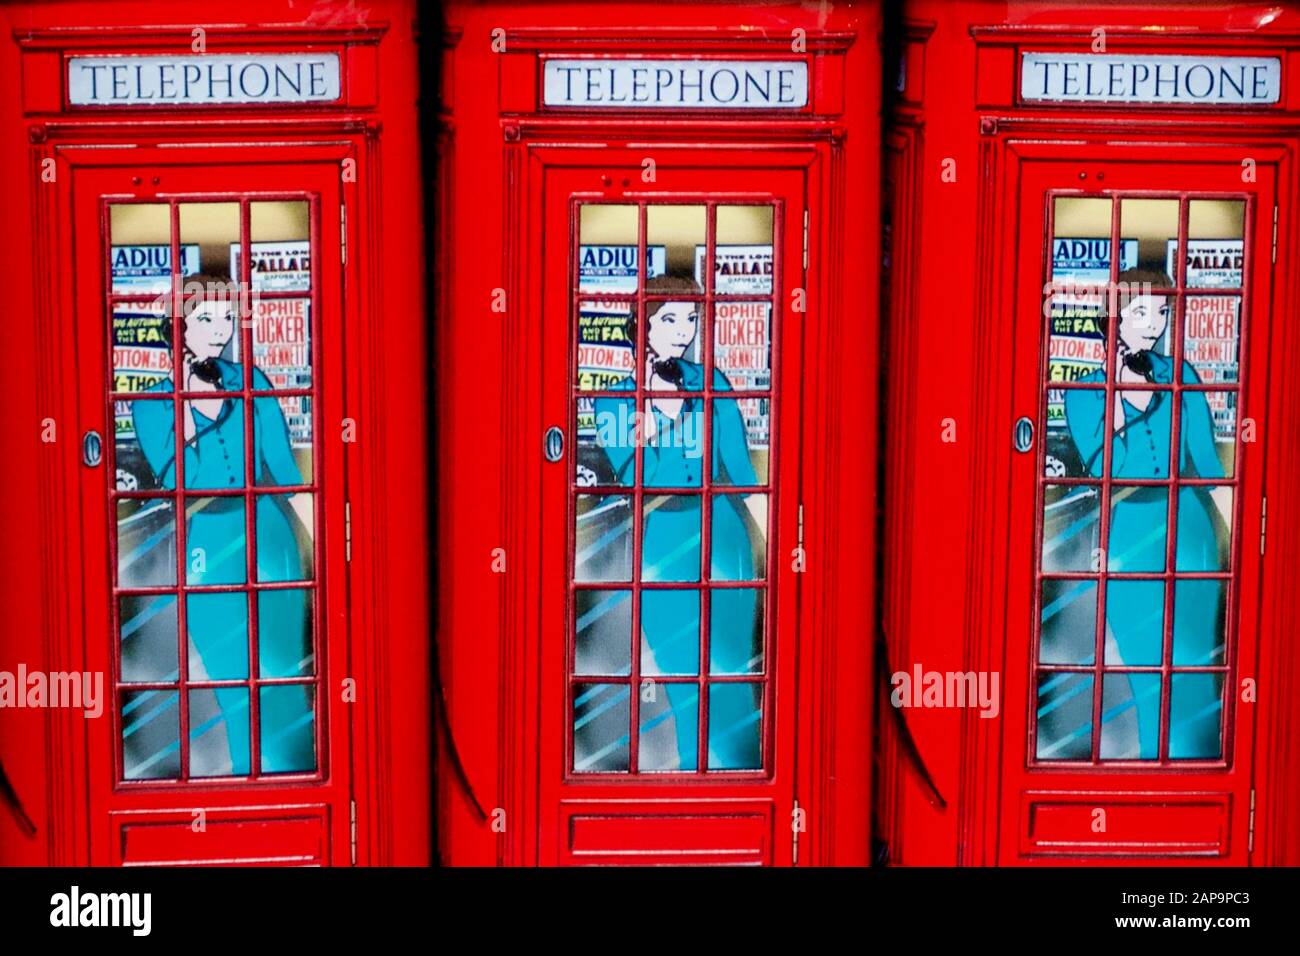 Red Telephone Box, Money Box, Londres, Angleterre. Banque D'Images